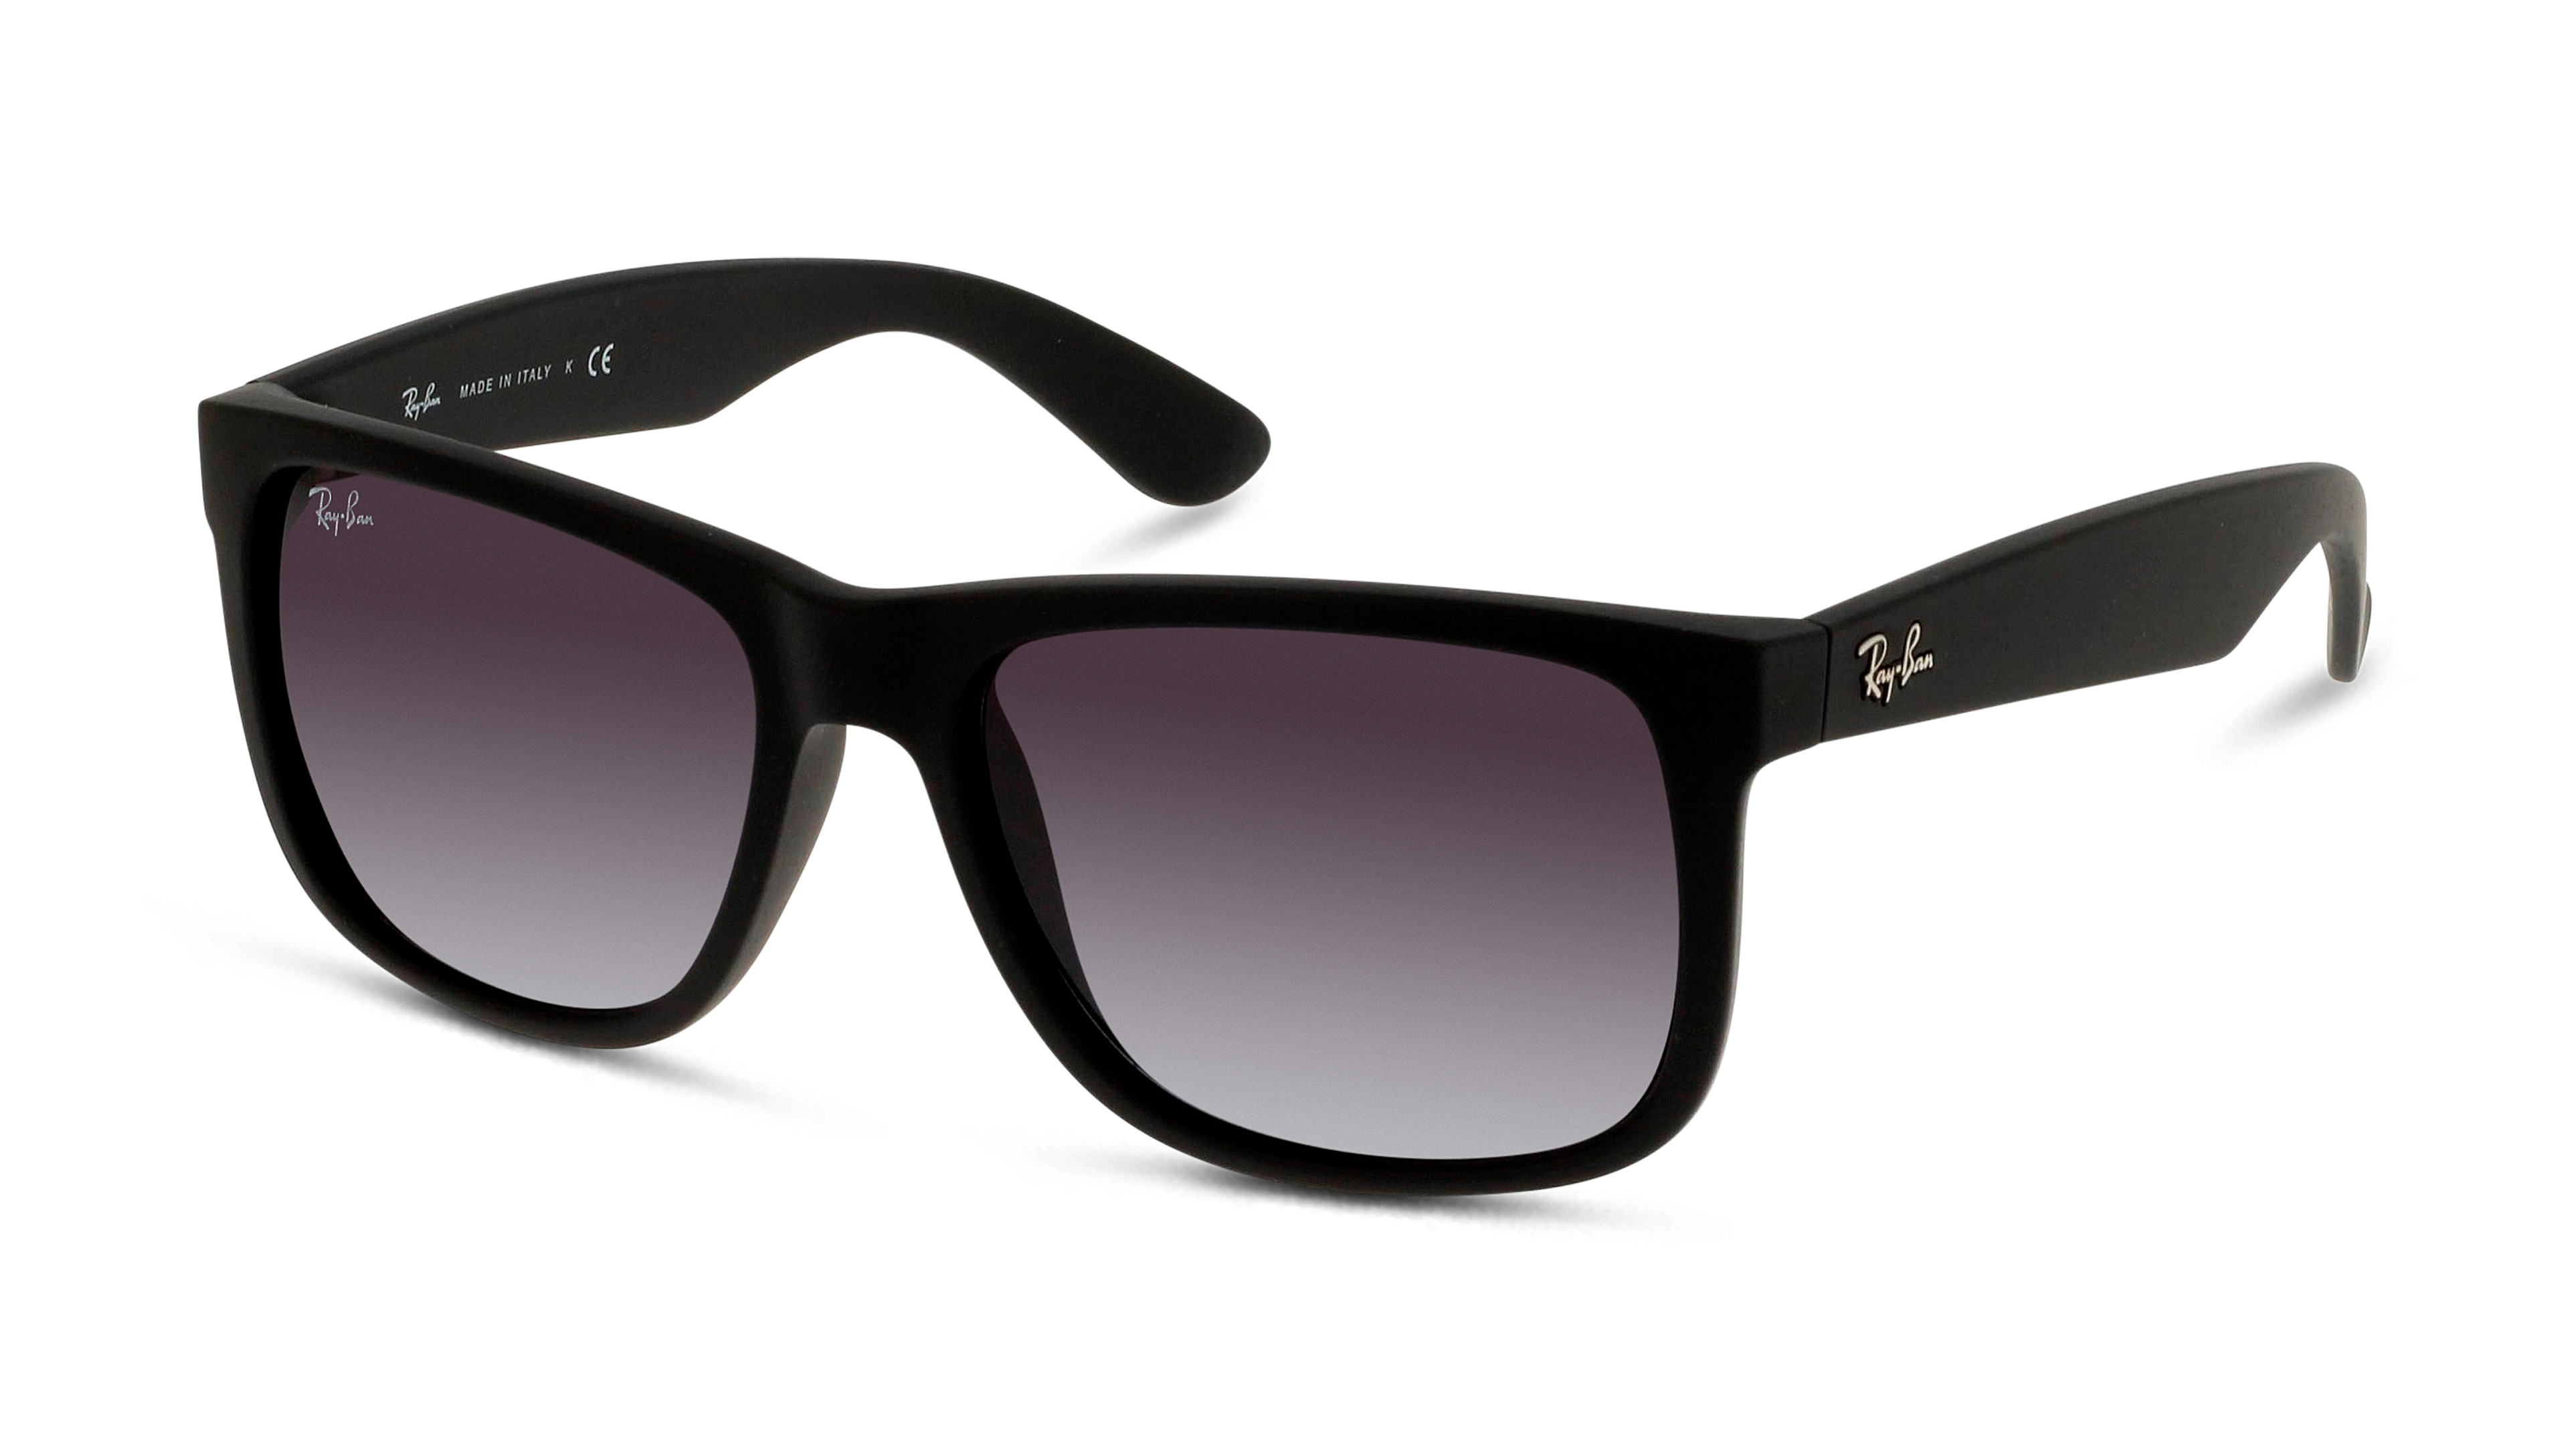 [products.image.angle_left01] Ray-Ban JUSTIN 0RB4165 601/8G Sonnenbrille